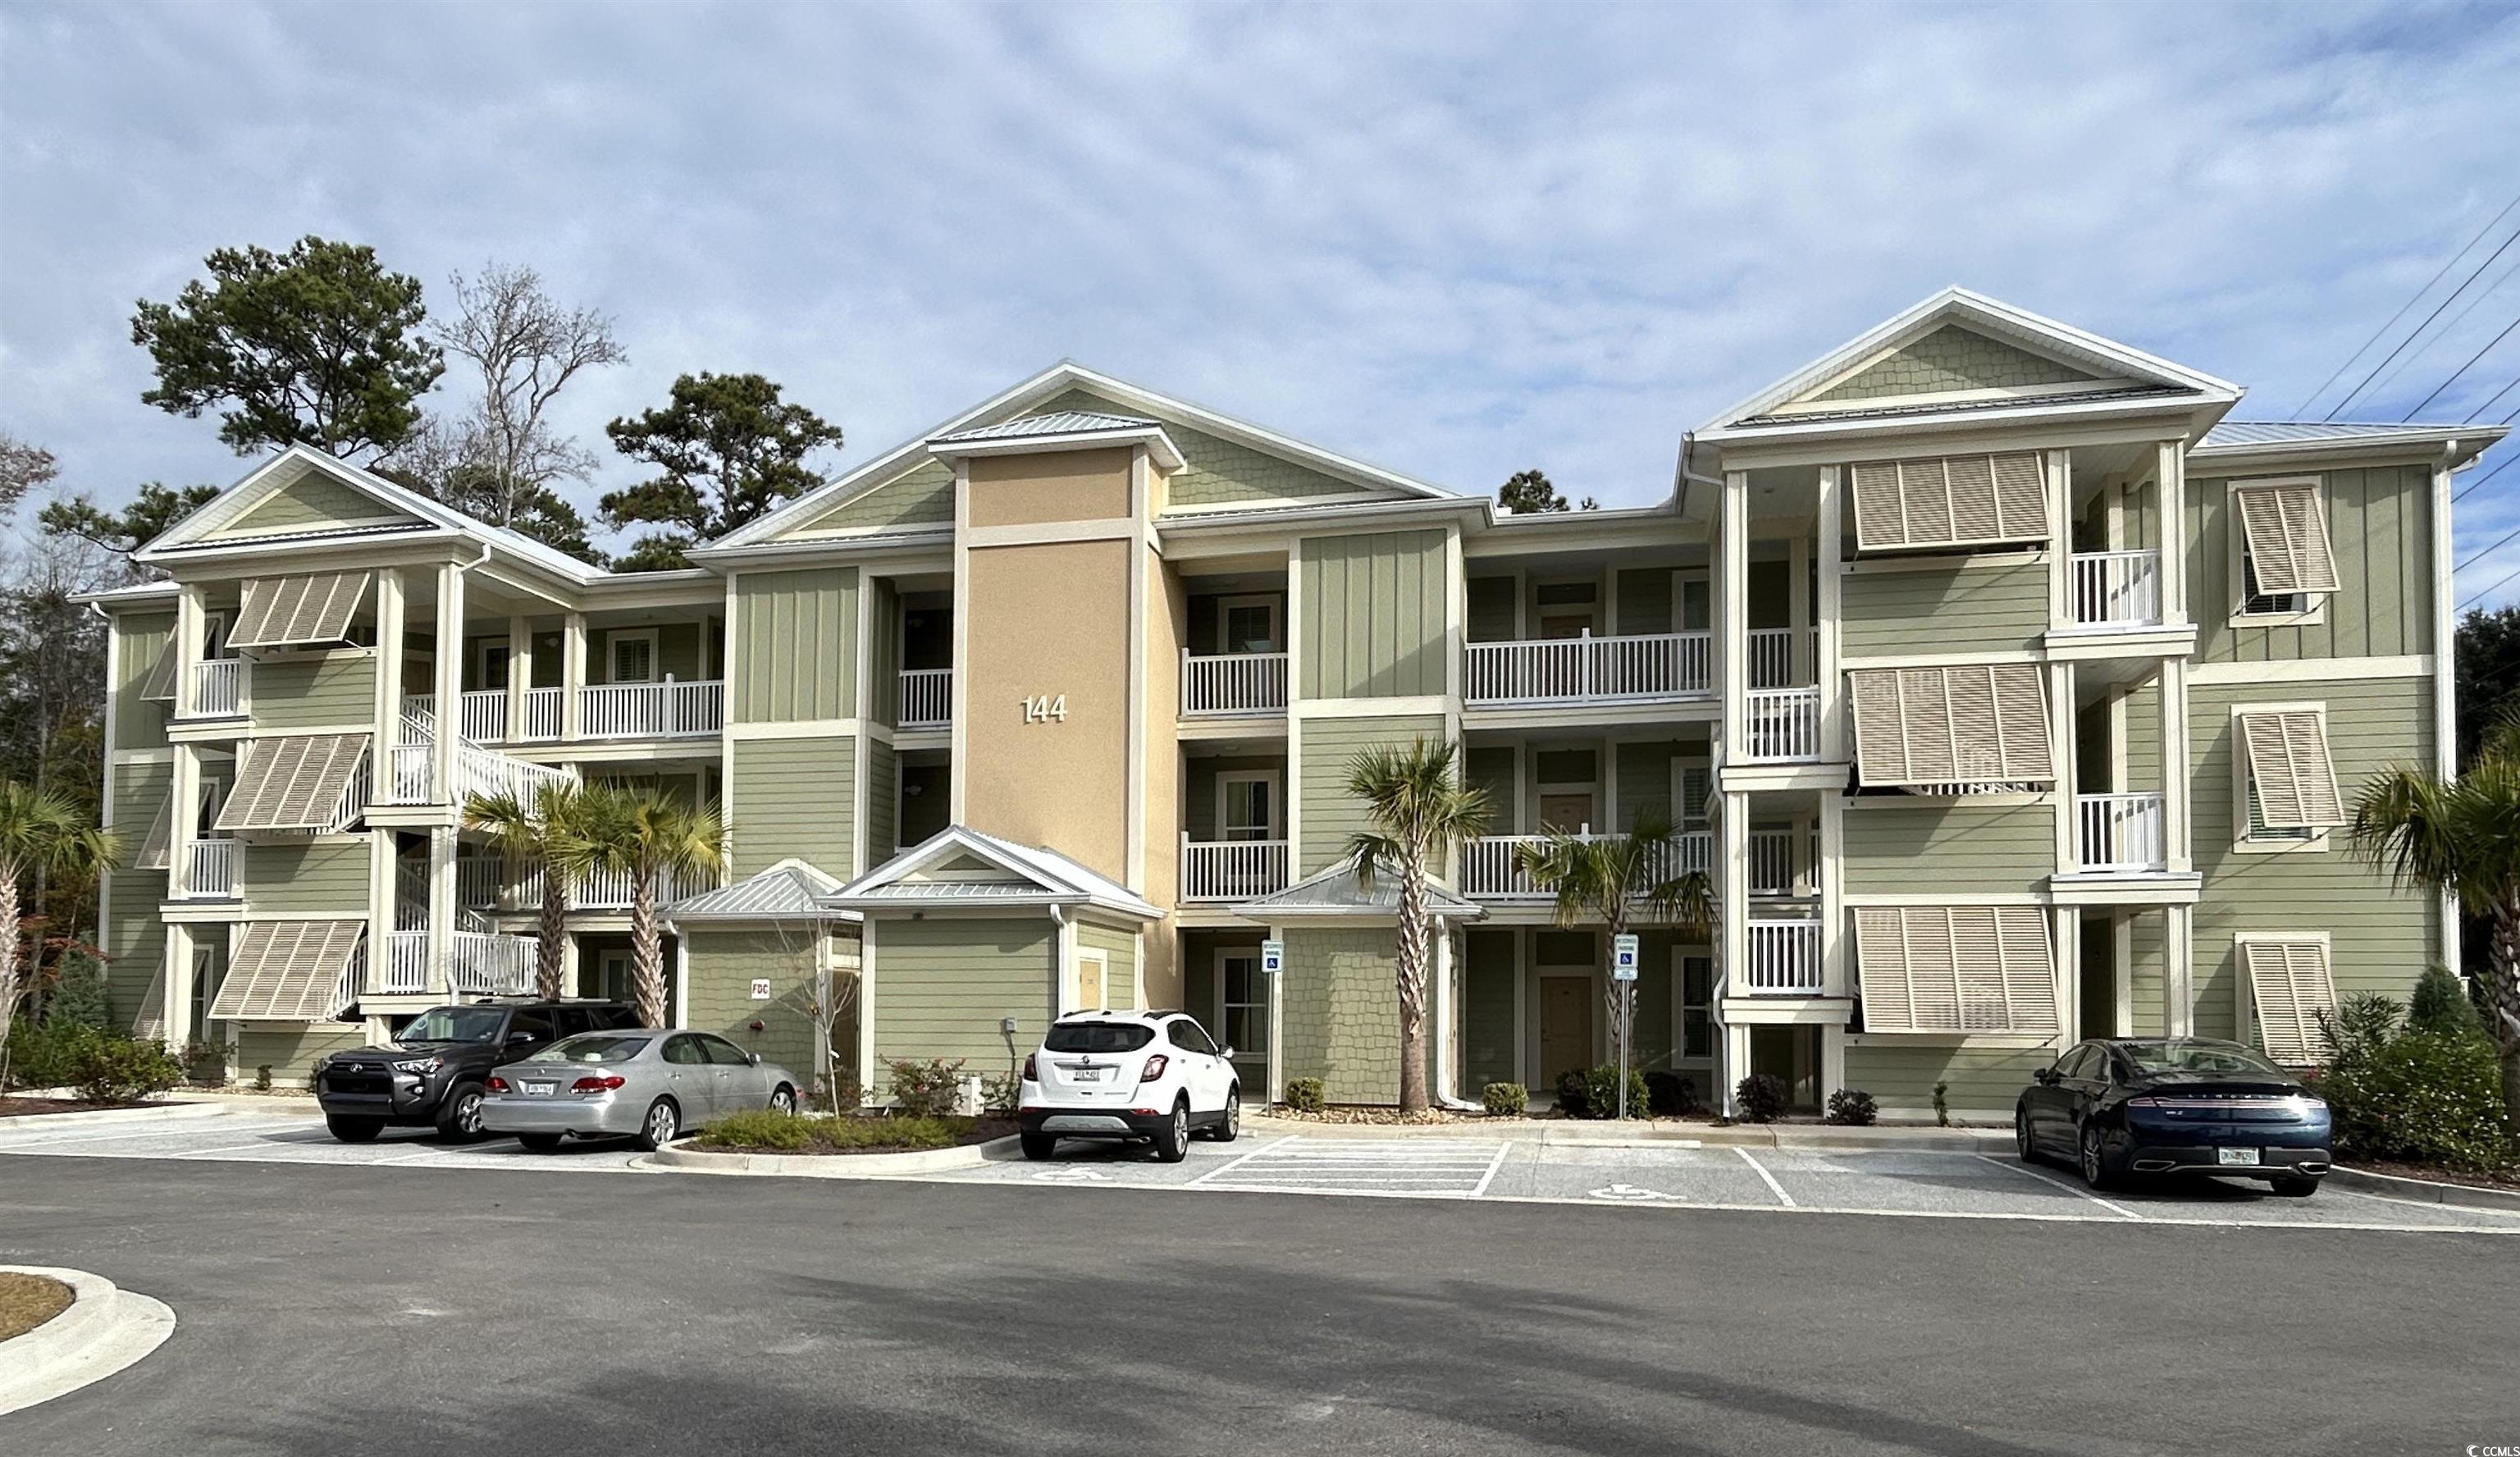 this condo community is located in the heart of the south carolina coast in a charming, historic fishing village. enjoy boating, live music, restaurants and scenic marsh views. it is located just 20 miles south of myrtle beach. the condos boast hardwood floors in the living areas, granite countertops in the kitchen and much more. each building has it's own elevator. enjoy the community pool and clubhouse.  brand new and move in ready! located in the heart of pawleys island, this first floor condo offers easy and convenient coastallifestyle living. an affordable opportunity to have your own place at the beach. elevators and a pool, hardwood floors, granitecountertops, and a screened porch are a few of the details you'll love! while being located near public tennis courts, a fitness club,shopping and dining, you are also only a short drive to the beach, the river, golf courses, marches and marinas. this home offersall that you are hoping for in a sc beach community. photos are from the same floor plan unit in building 2 on the first floor.  (specifications and colors may vary.) square footage is approximate; the buyer and buyer's agent are responsible for verifying all square footage and all other information. square footage and acreage came from the builder's floor plans. seller/builder reserves the right and may change these floor plans, specifications, dimensions without prior notice. the owner reserves the right to make make changes. camilia plan